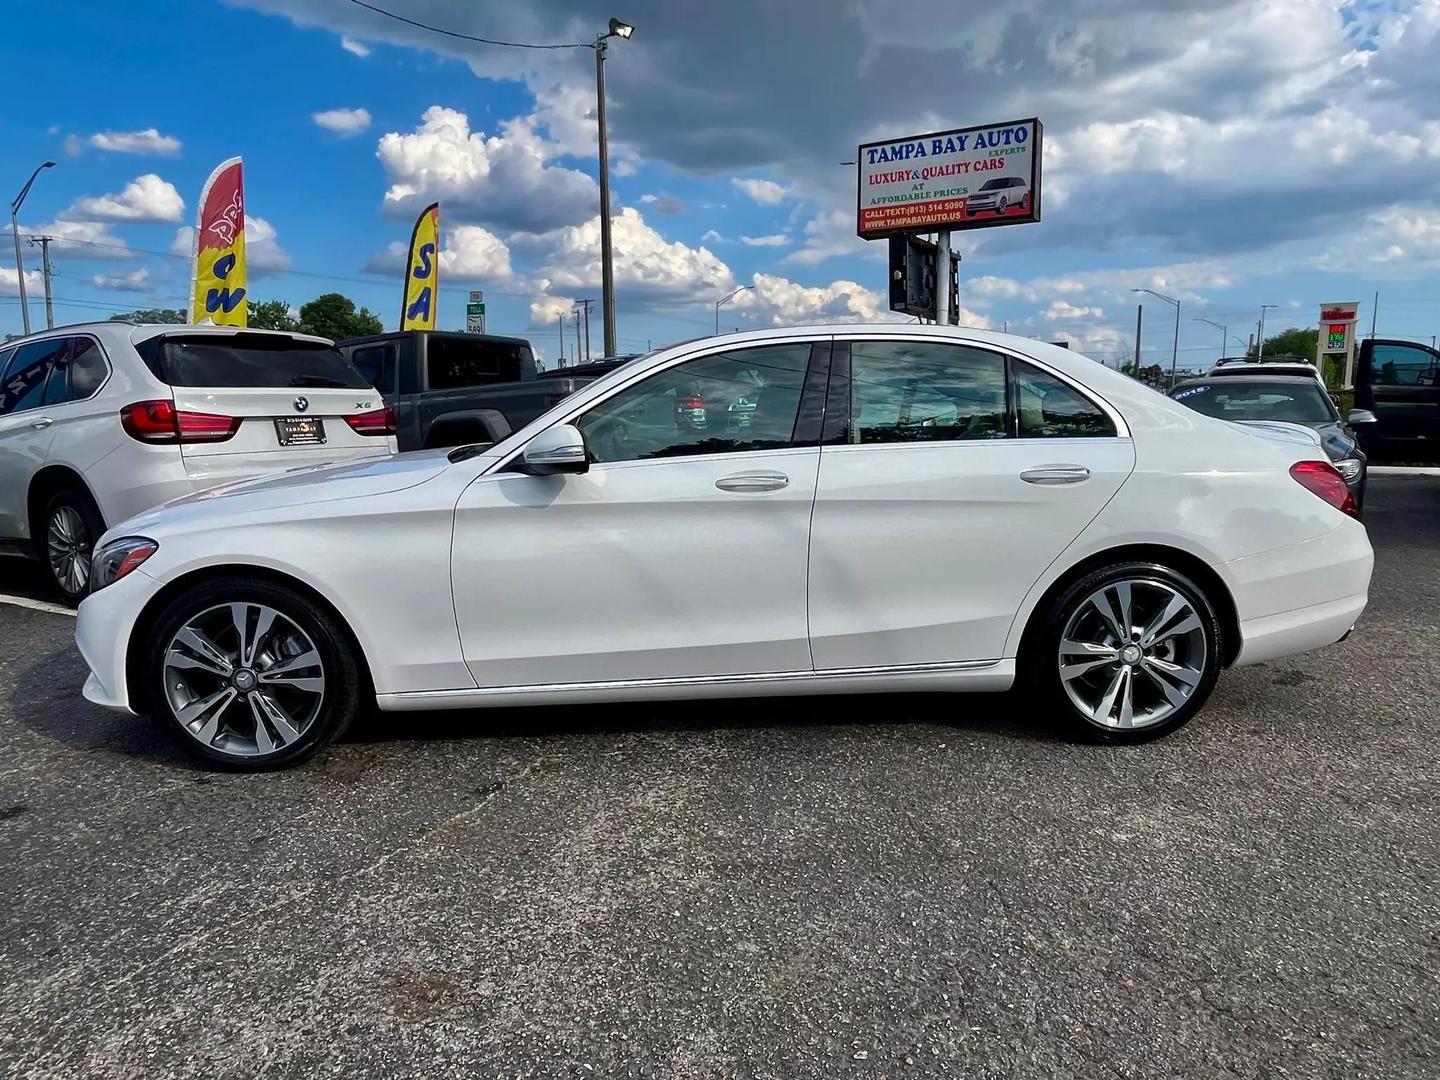 Used 2015 Mercedes-Benz C-Class C300 with VIN 55SWF4JB2FU076747 for sale in Tampa, FL